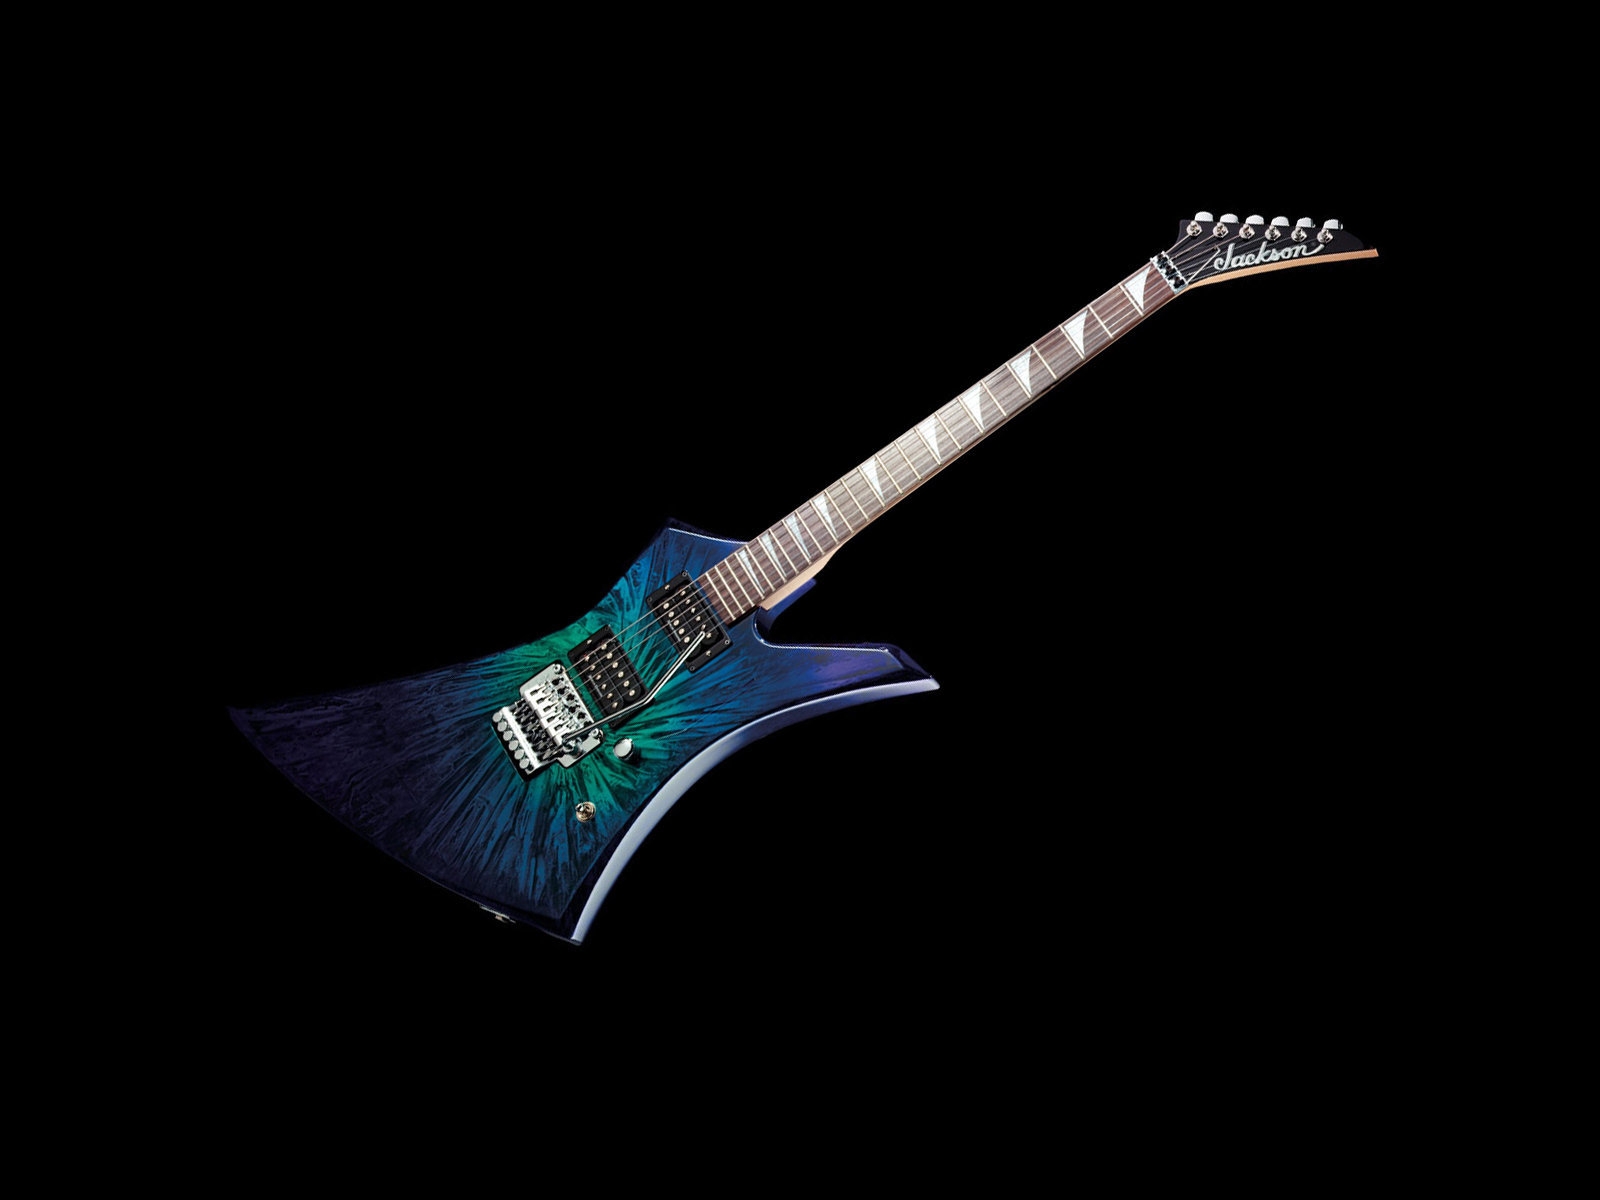 Colourful Guitar for 1600 x 1200 resolution